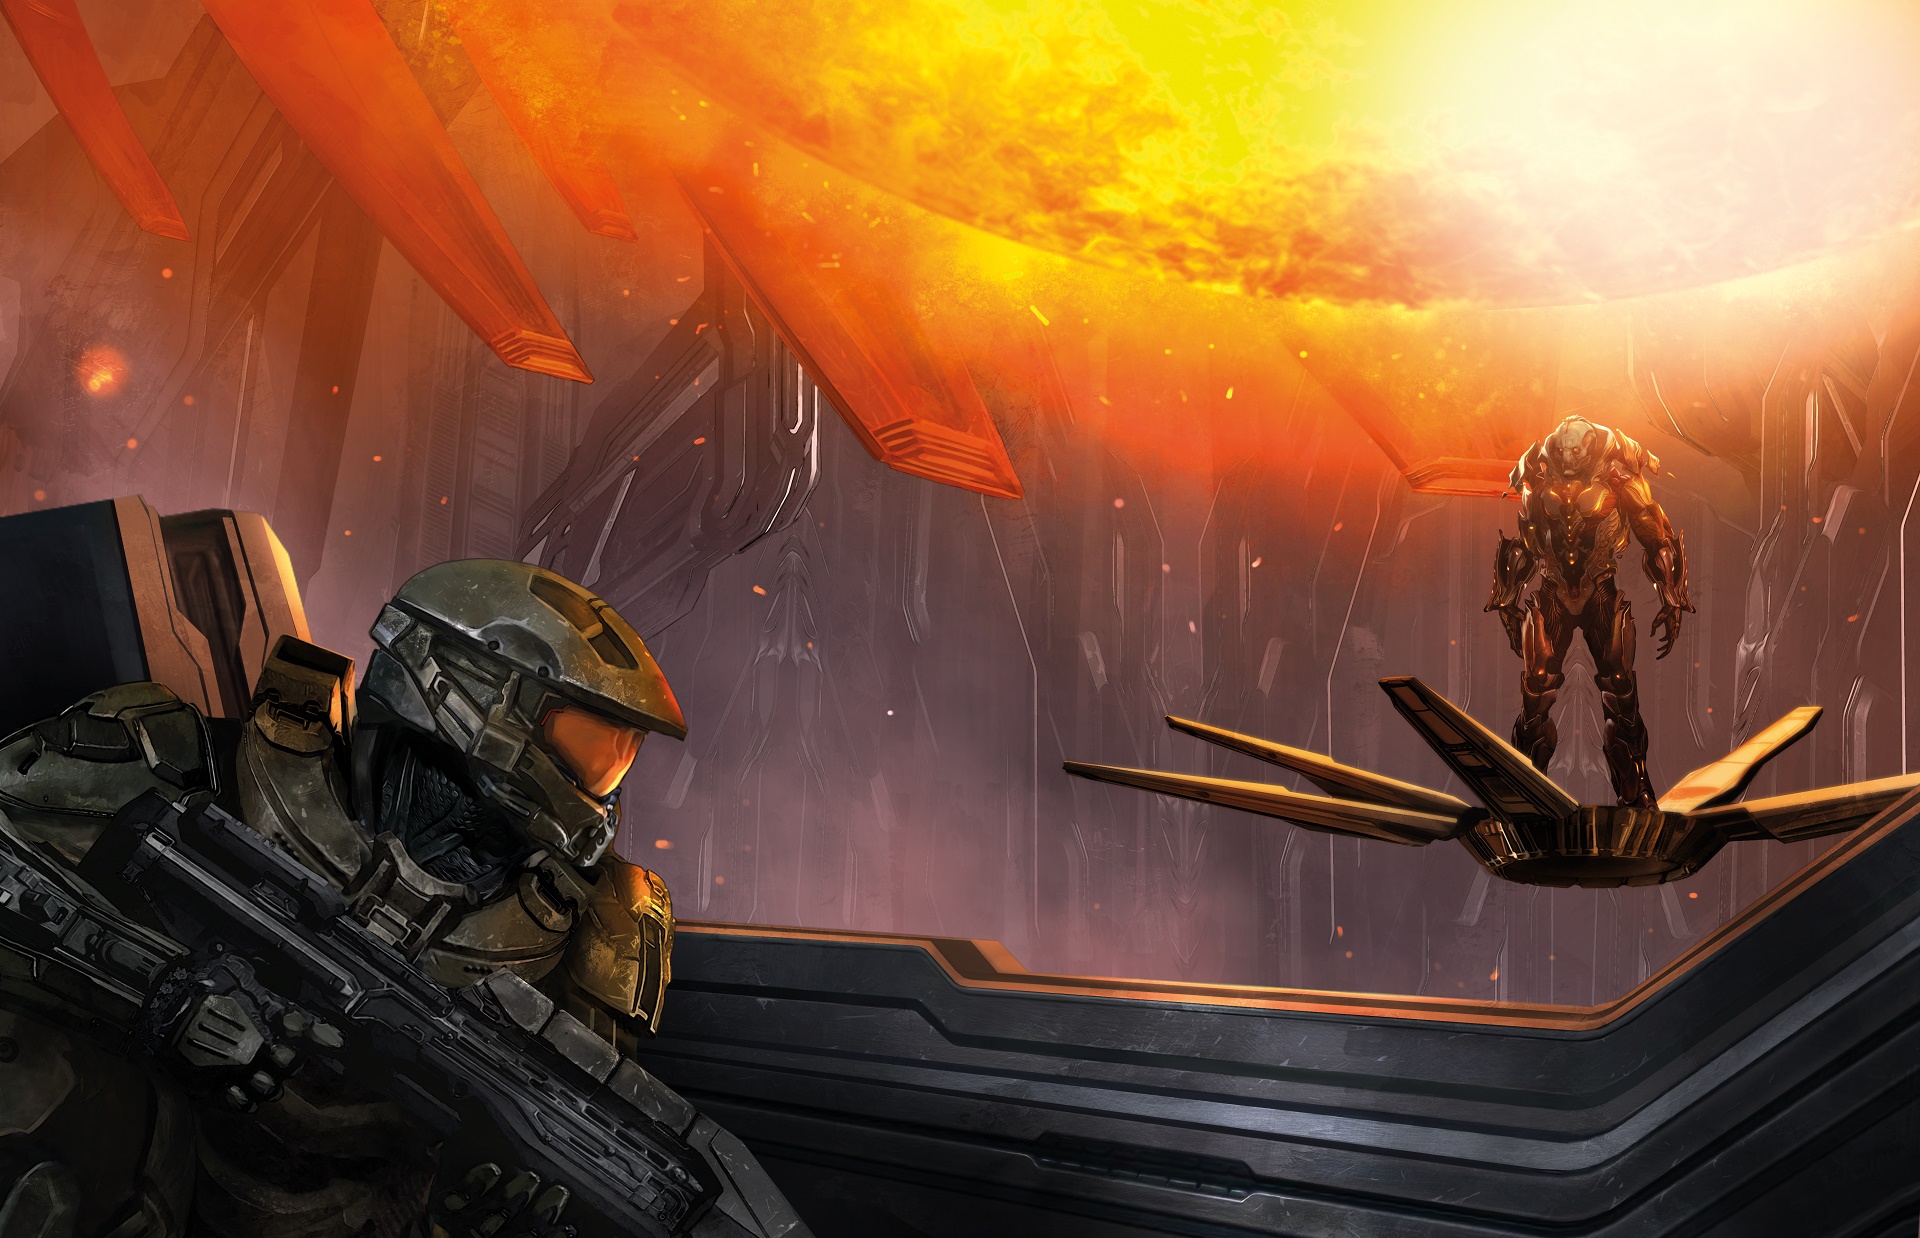 Halo Mythos art by Benjamin Carre of the Didact's awakening in Halo 4